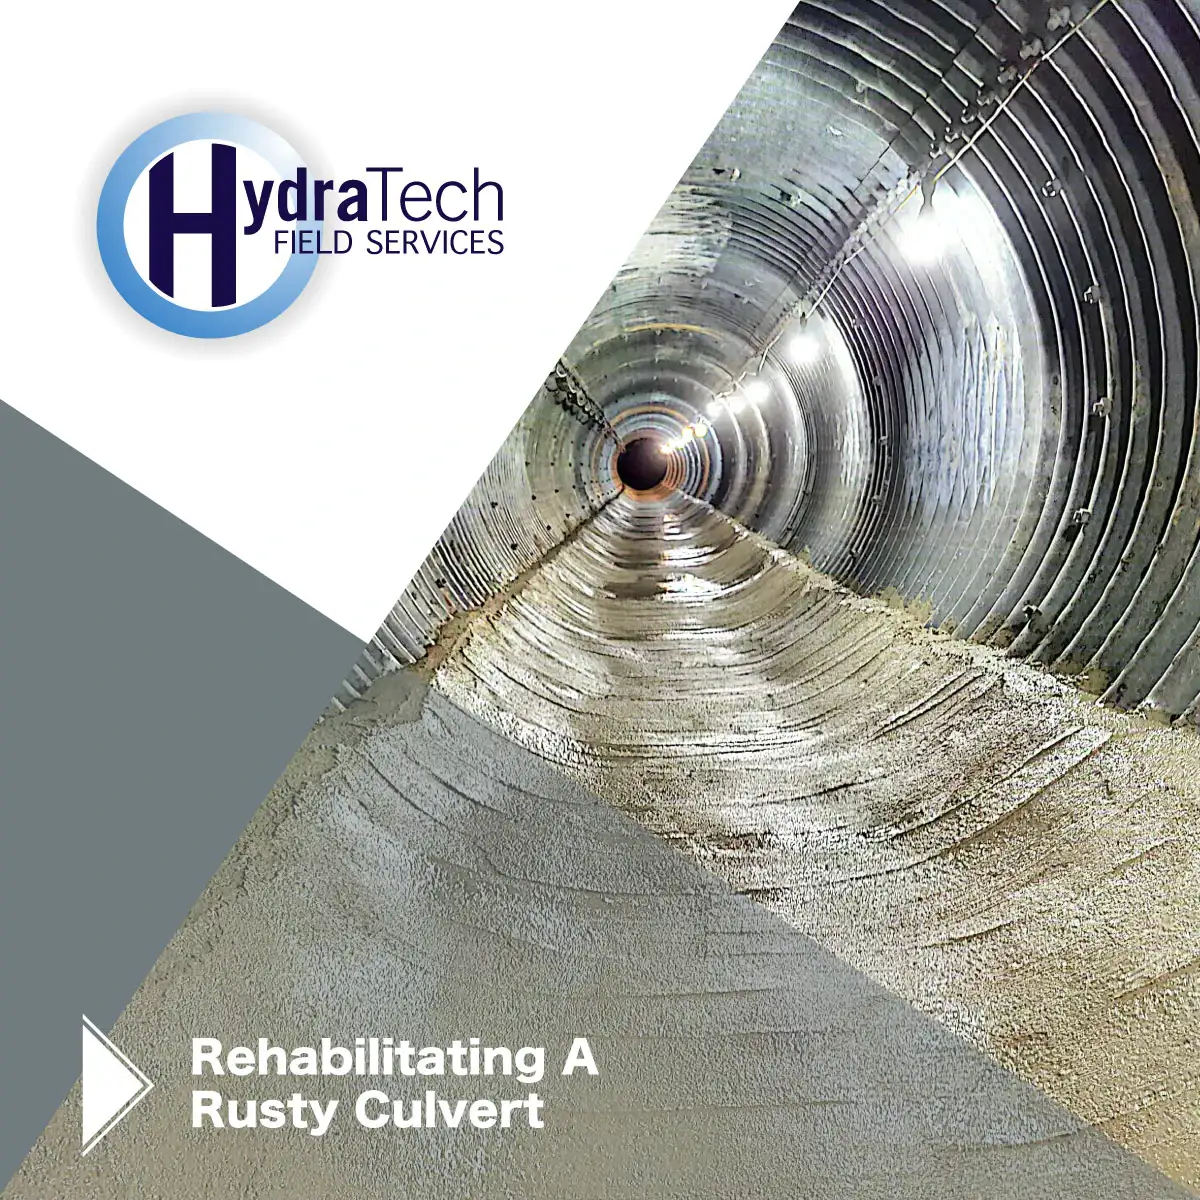 Culvert with a concrete coated invert, 'Rehabilitating A Rusty Culvert'